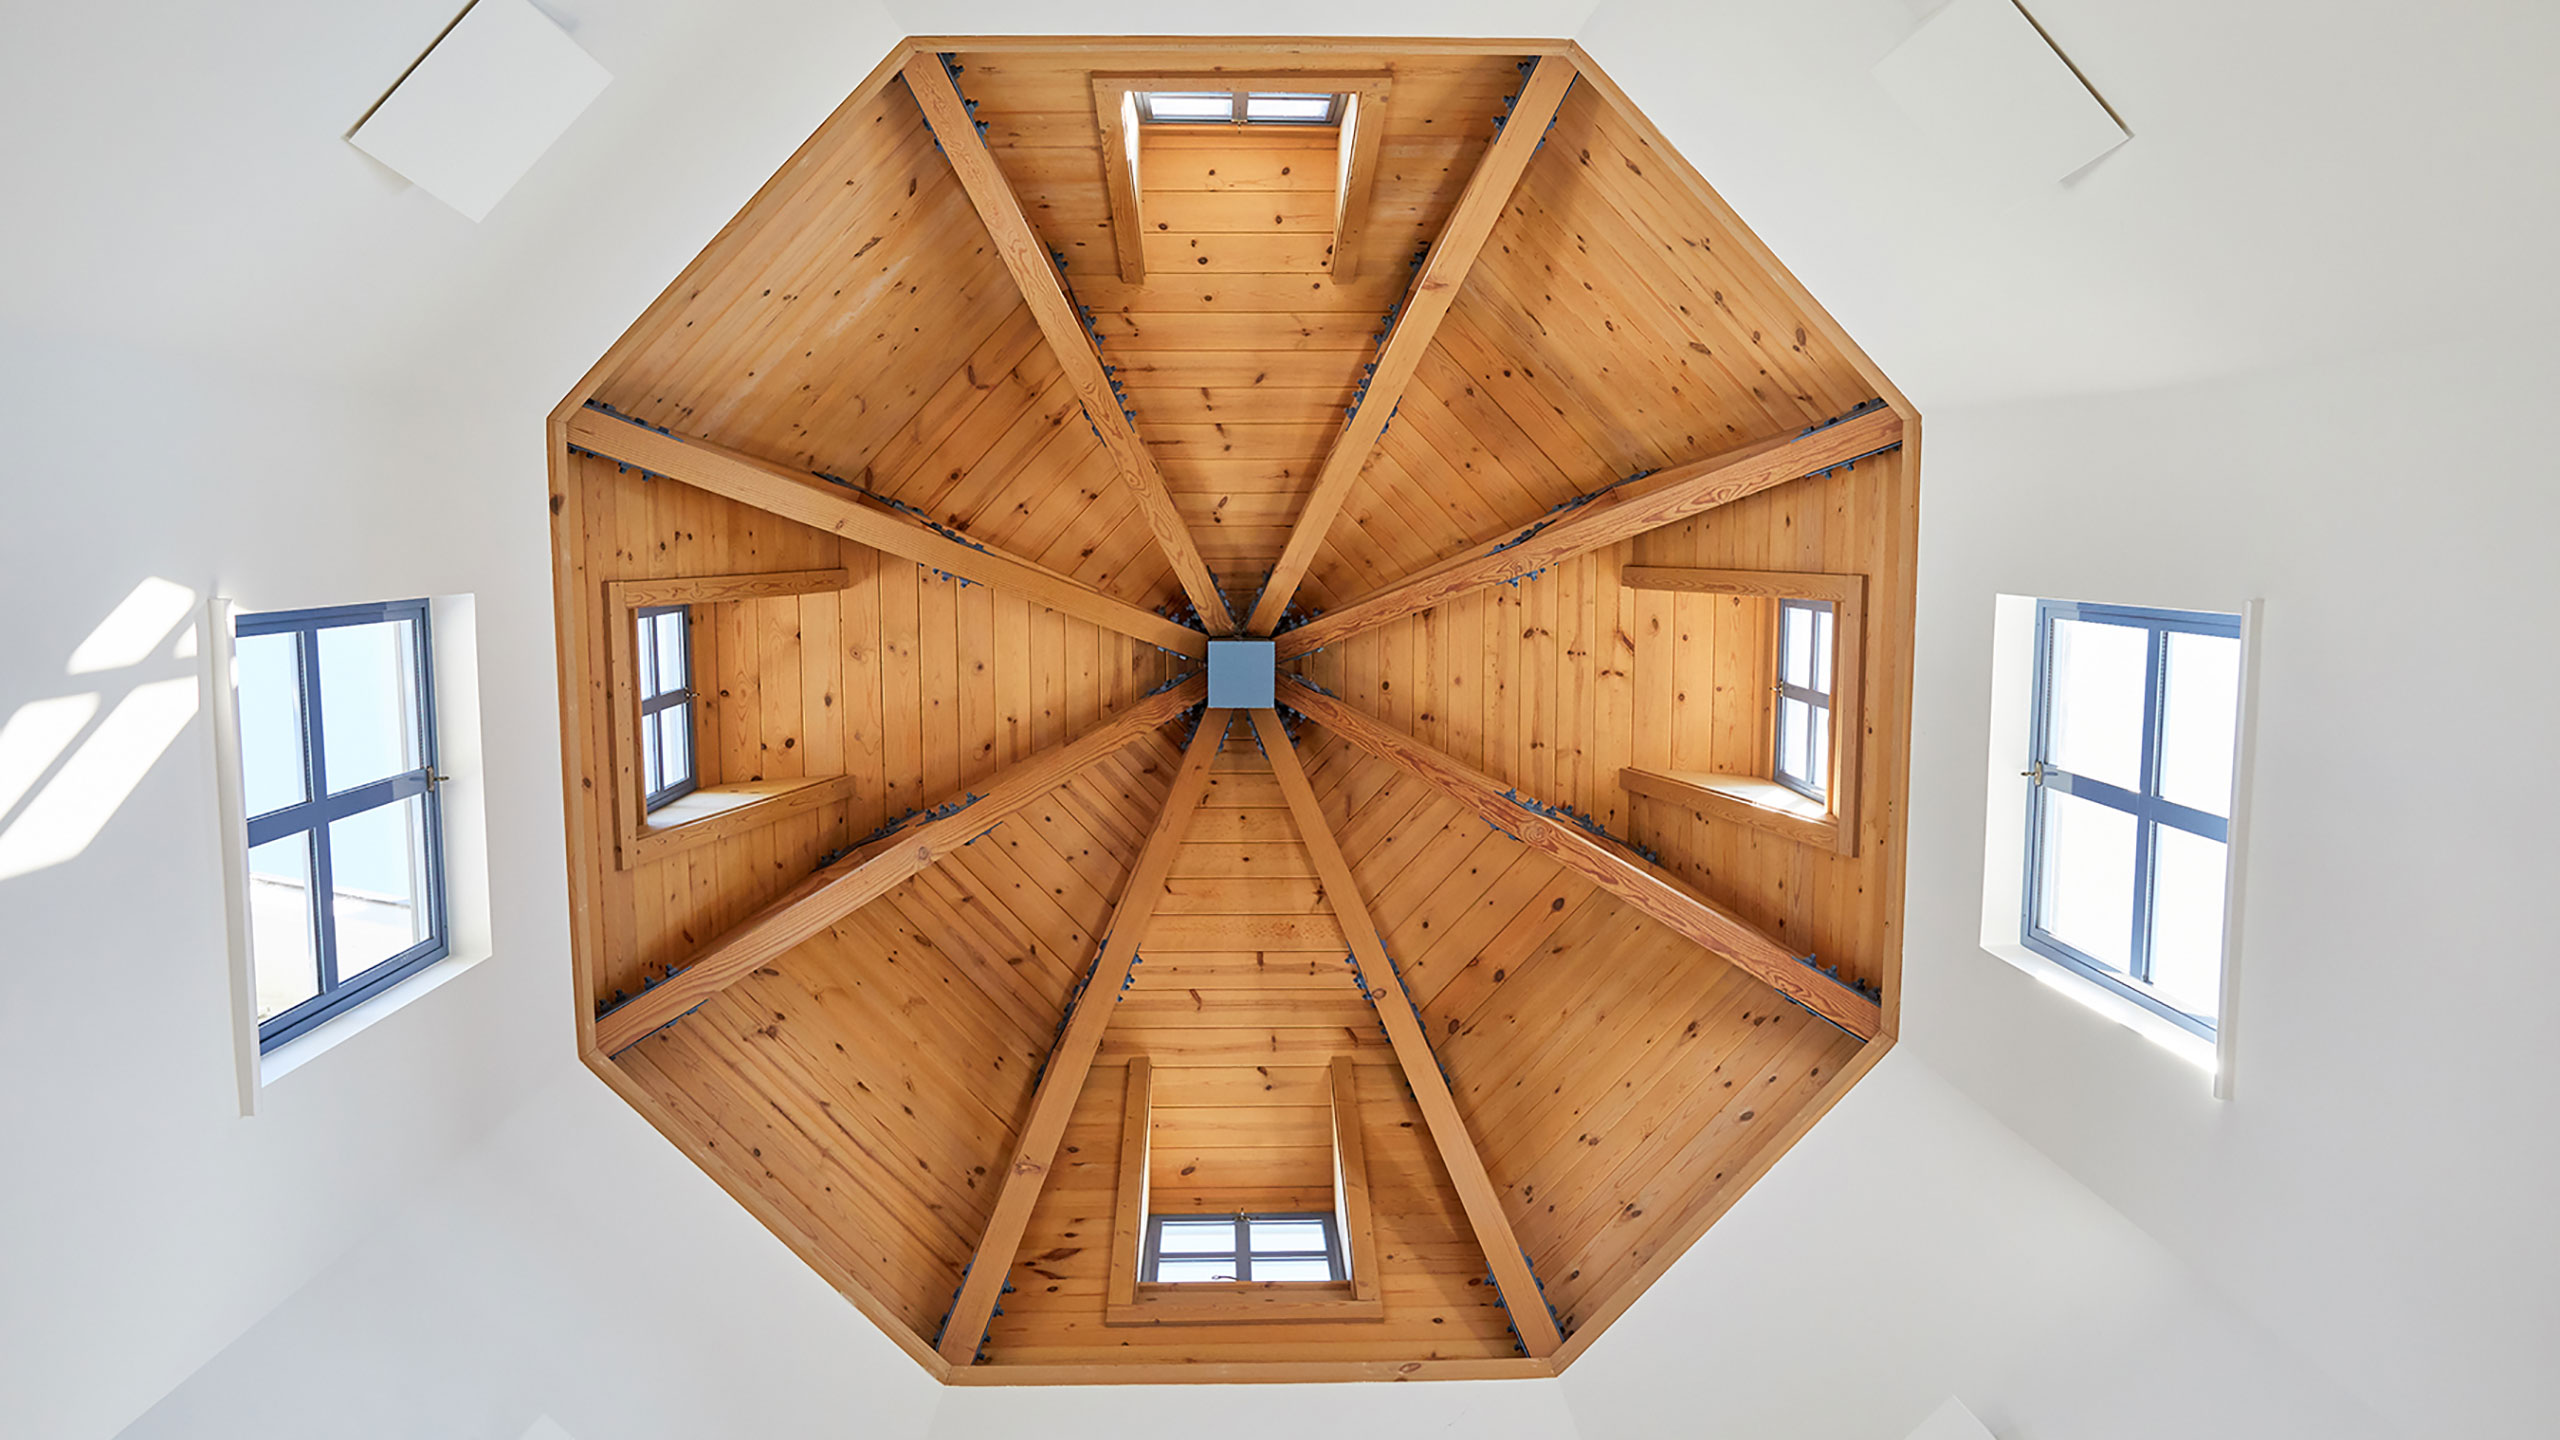 Napa-Farmhouse-round-room-in-tower-with-wood-ceiling